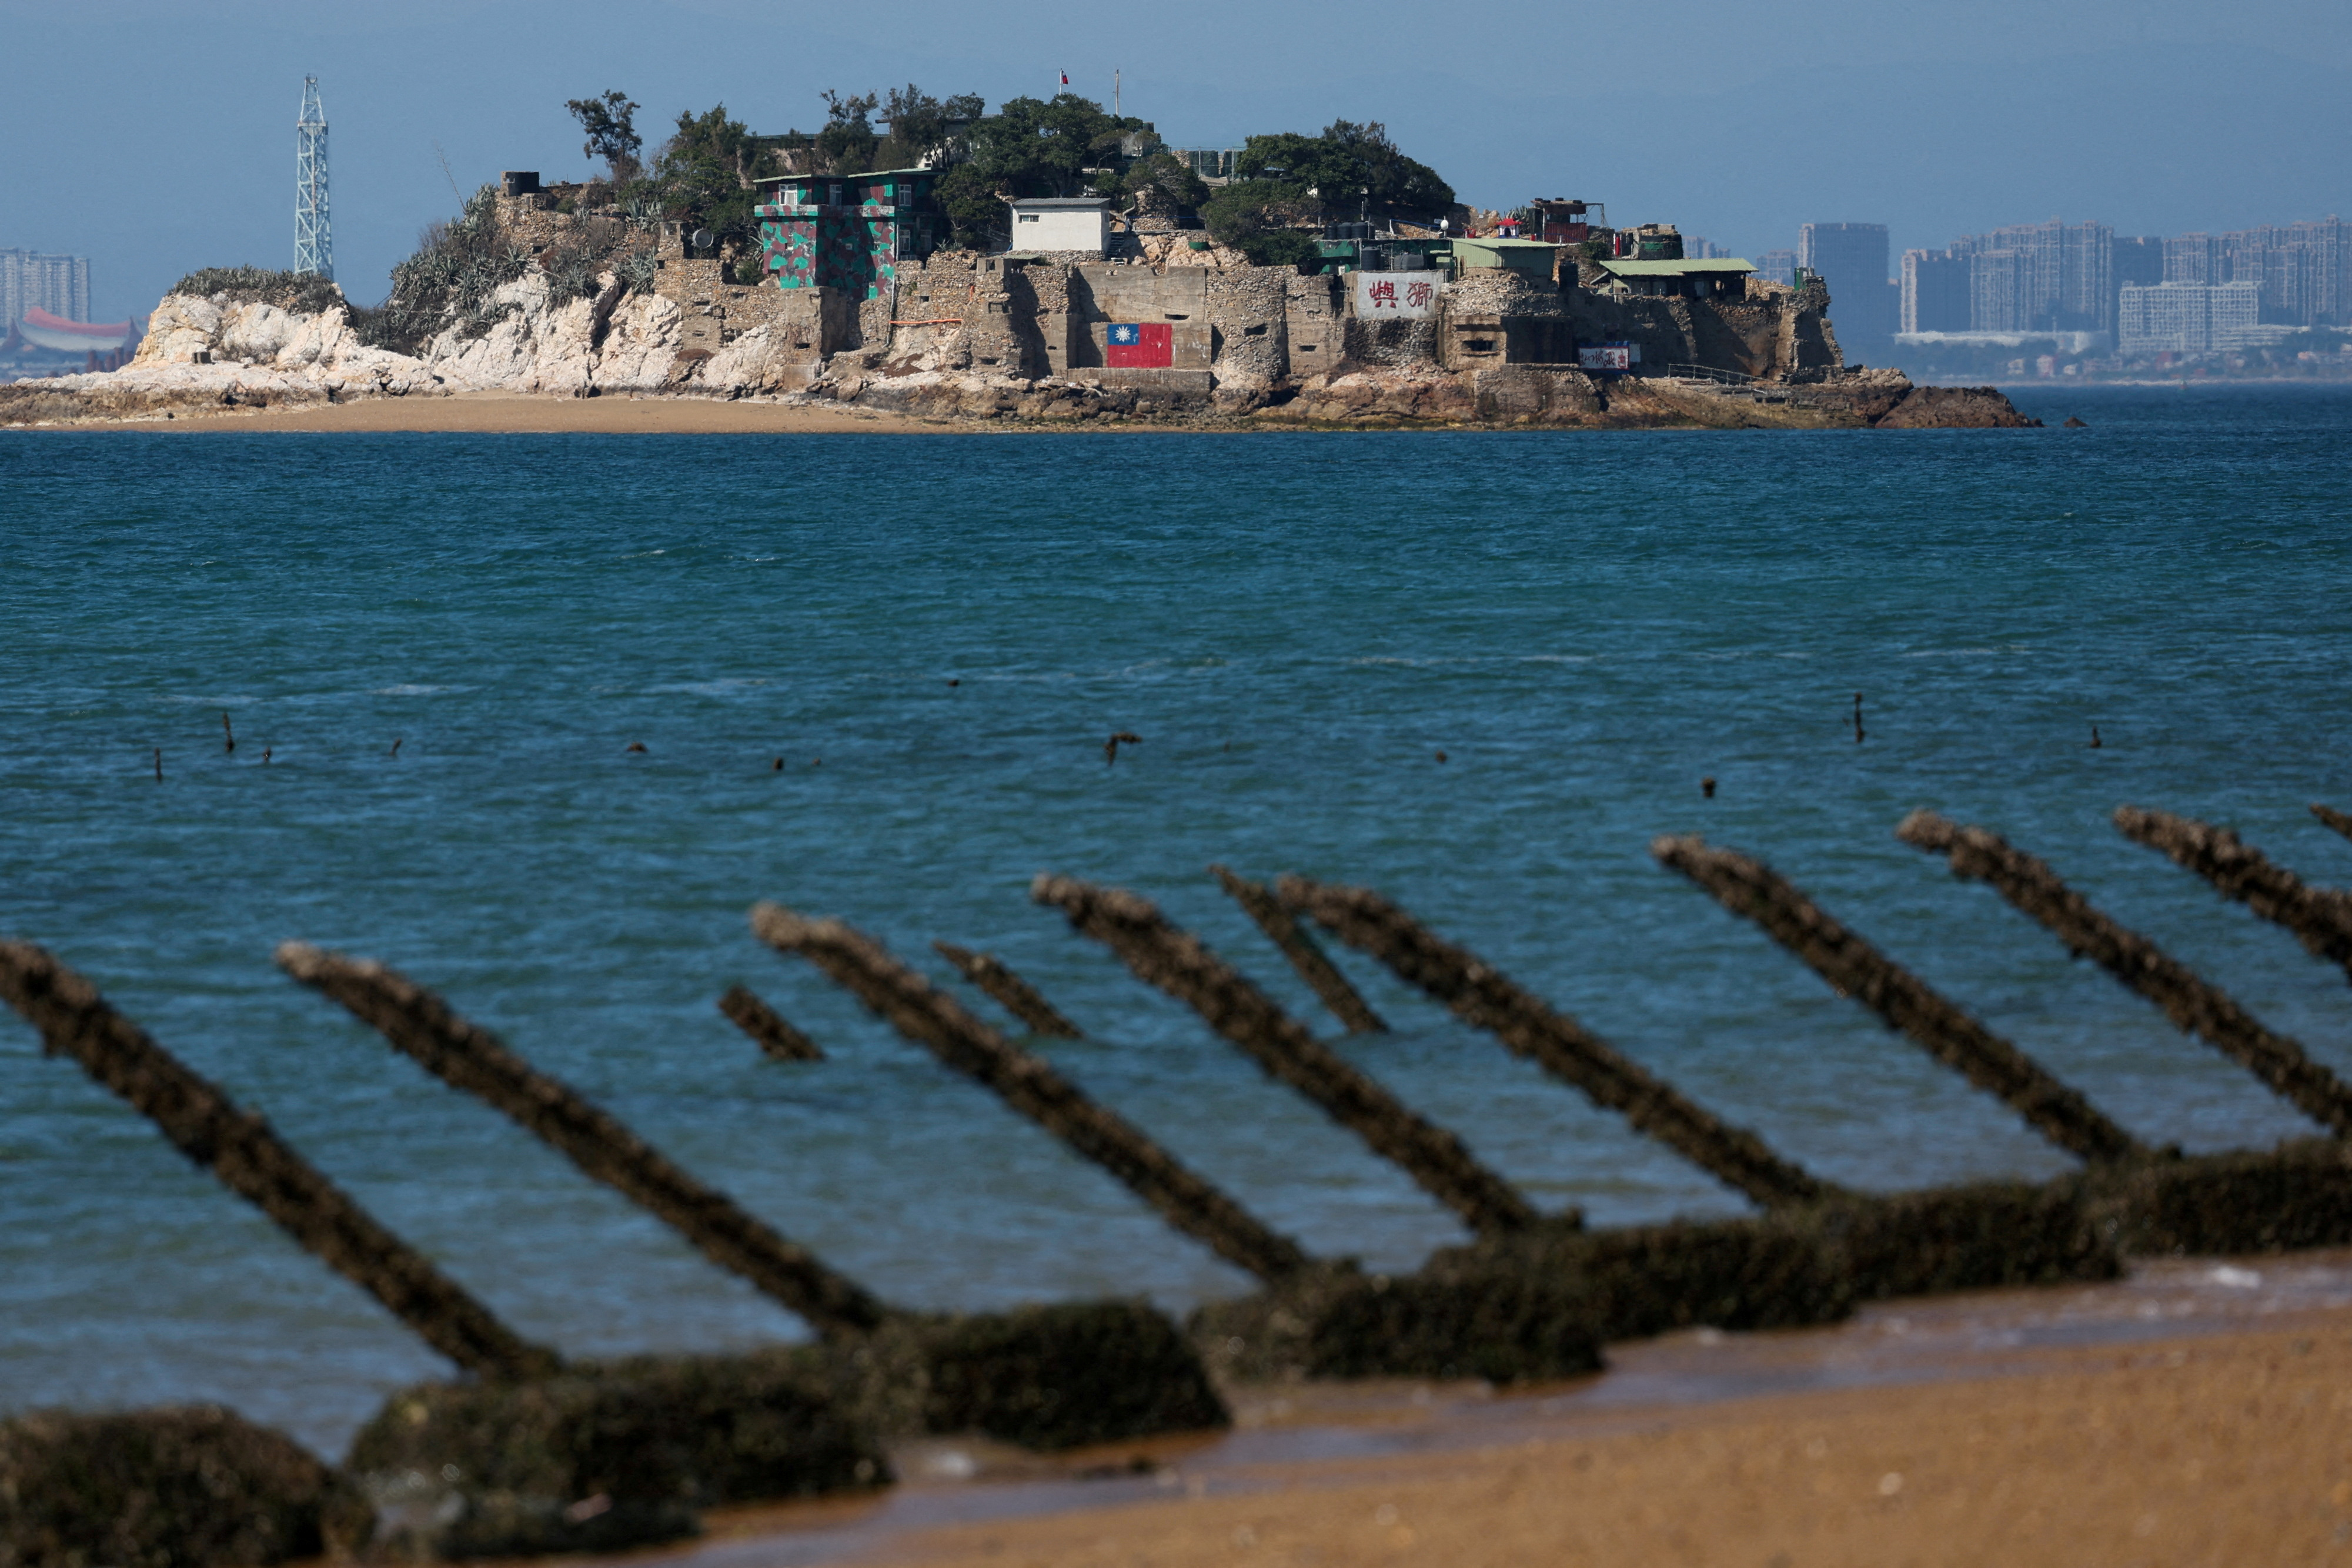 Shiyu or Lion Islet, which is part of Kinmen County, one of Taiwan's offshore islands, is pictured with China's Xiamen in the background, in Kinmen